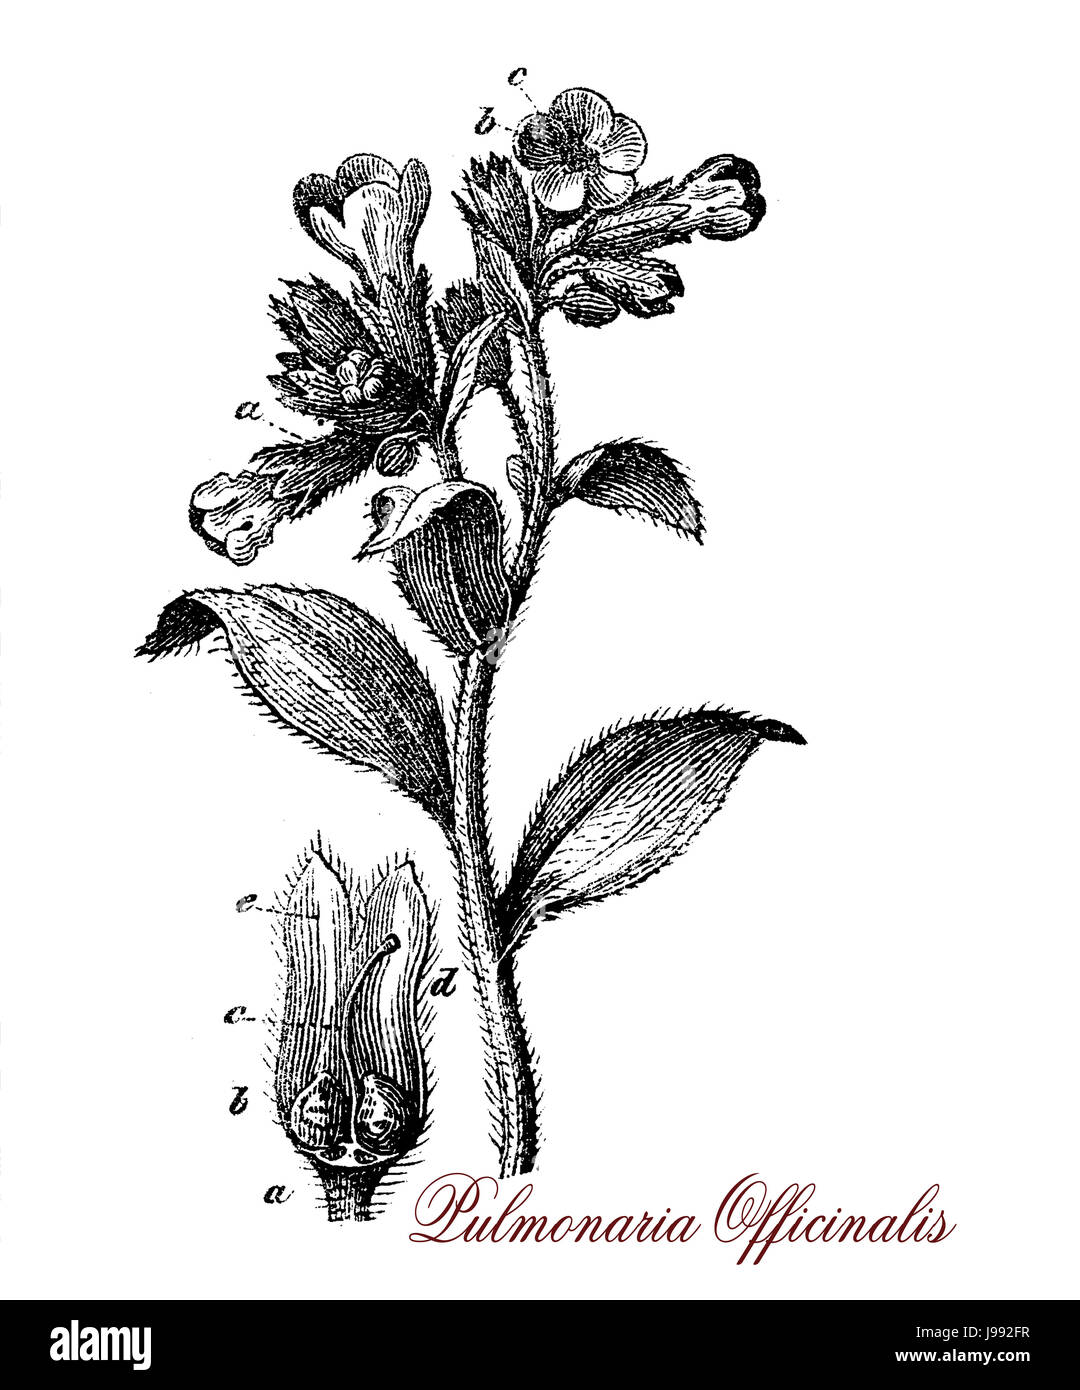 Vintage illustration of Pulmonaria officinalis, perennial plant with purple flowers cultivated as herbal medicine since Middle Ages Stock Photo